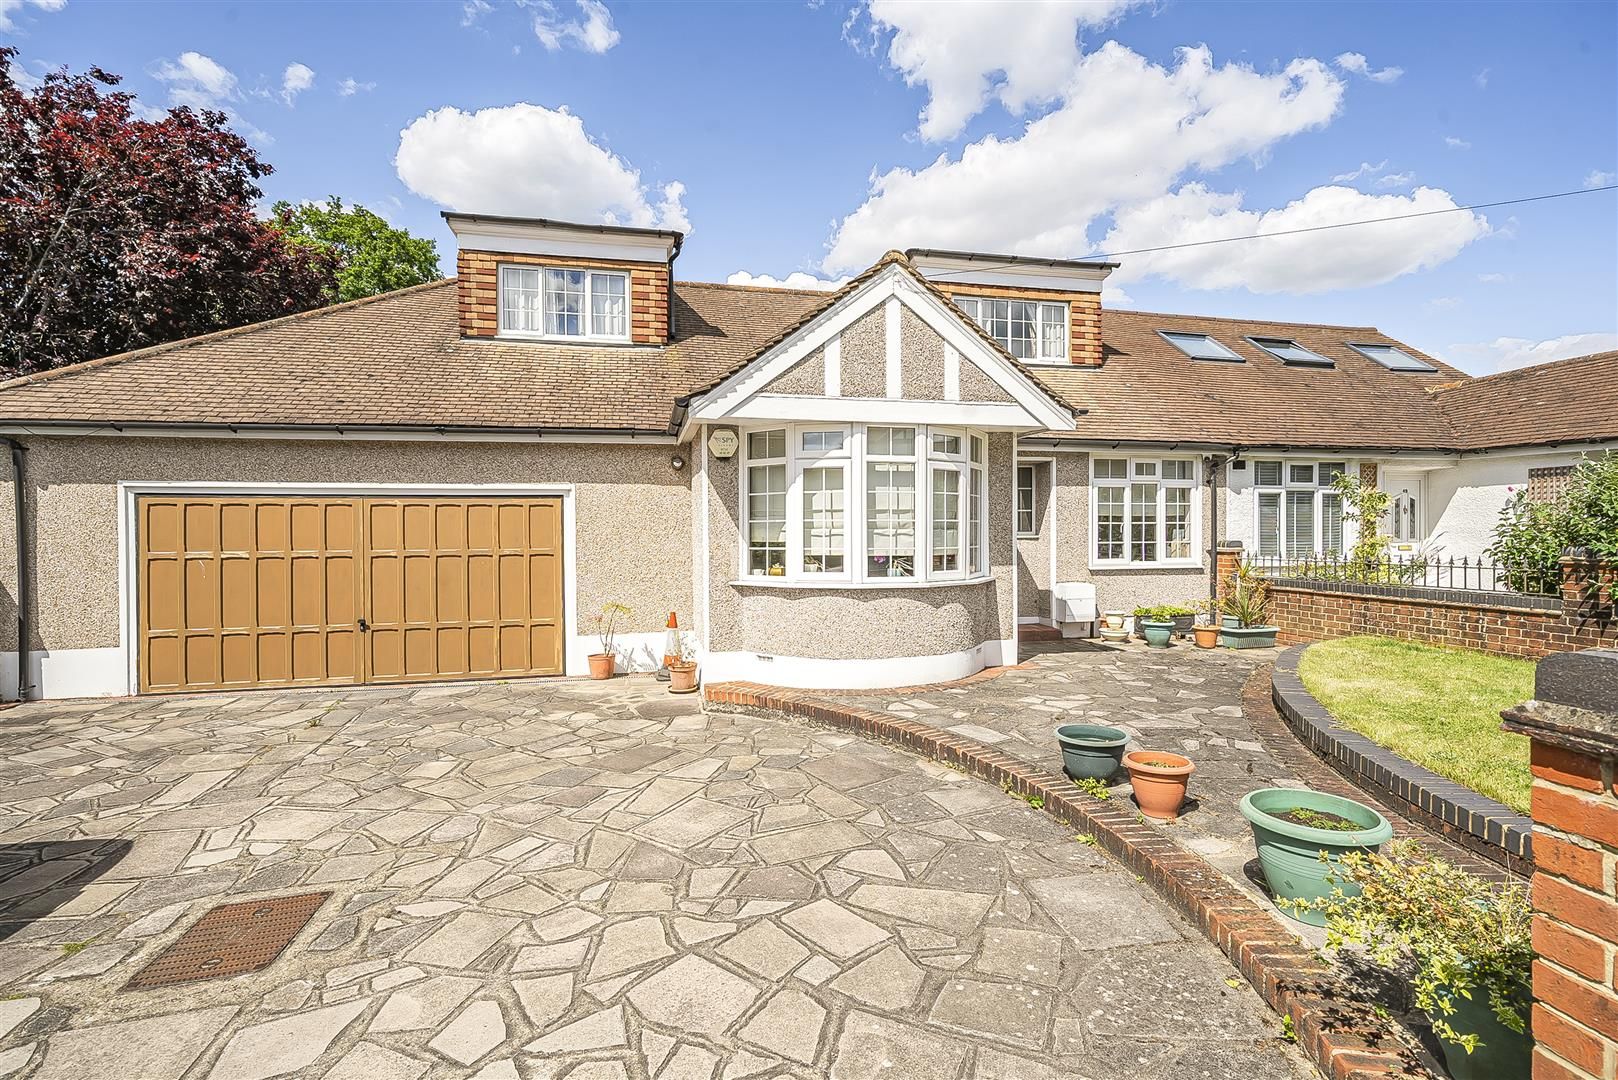 Oxhawth Crescent, Bromley, Kent, BR2 8BN